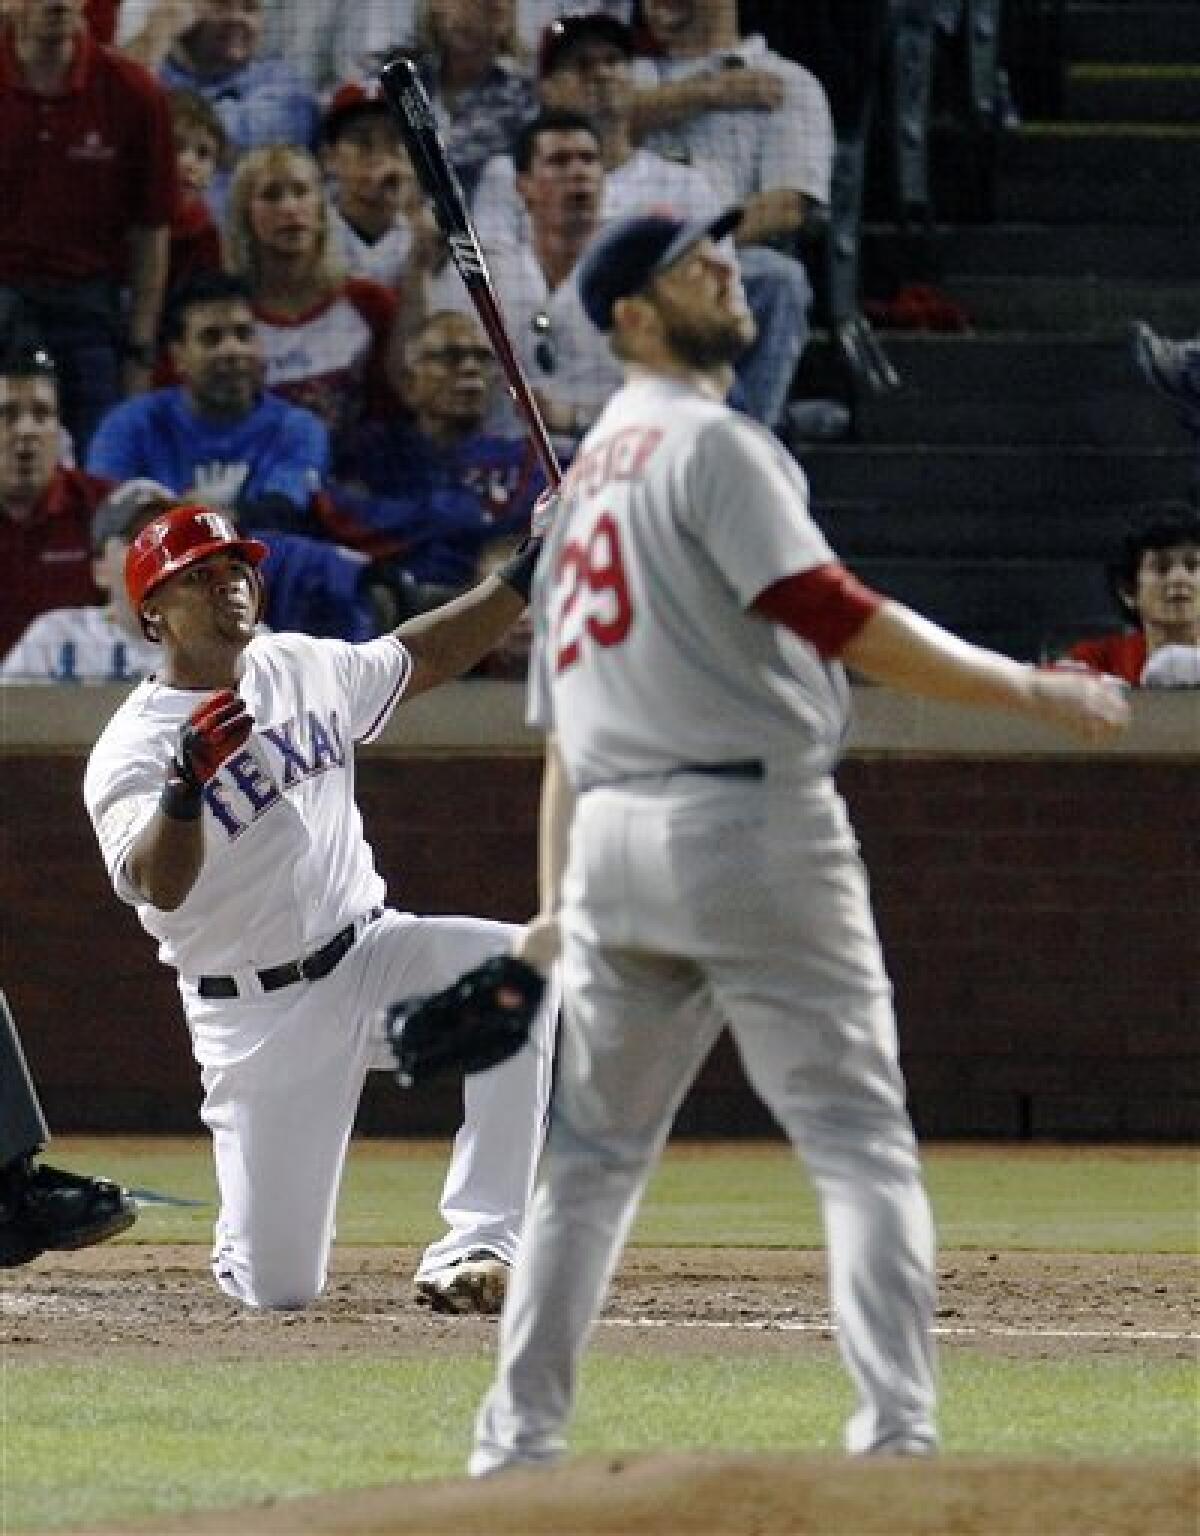 Game 5: Beltre homers in 6th, score tied 2-all - The San Diego